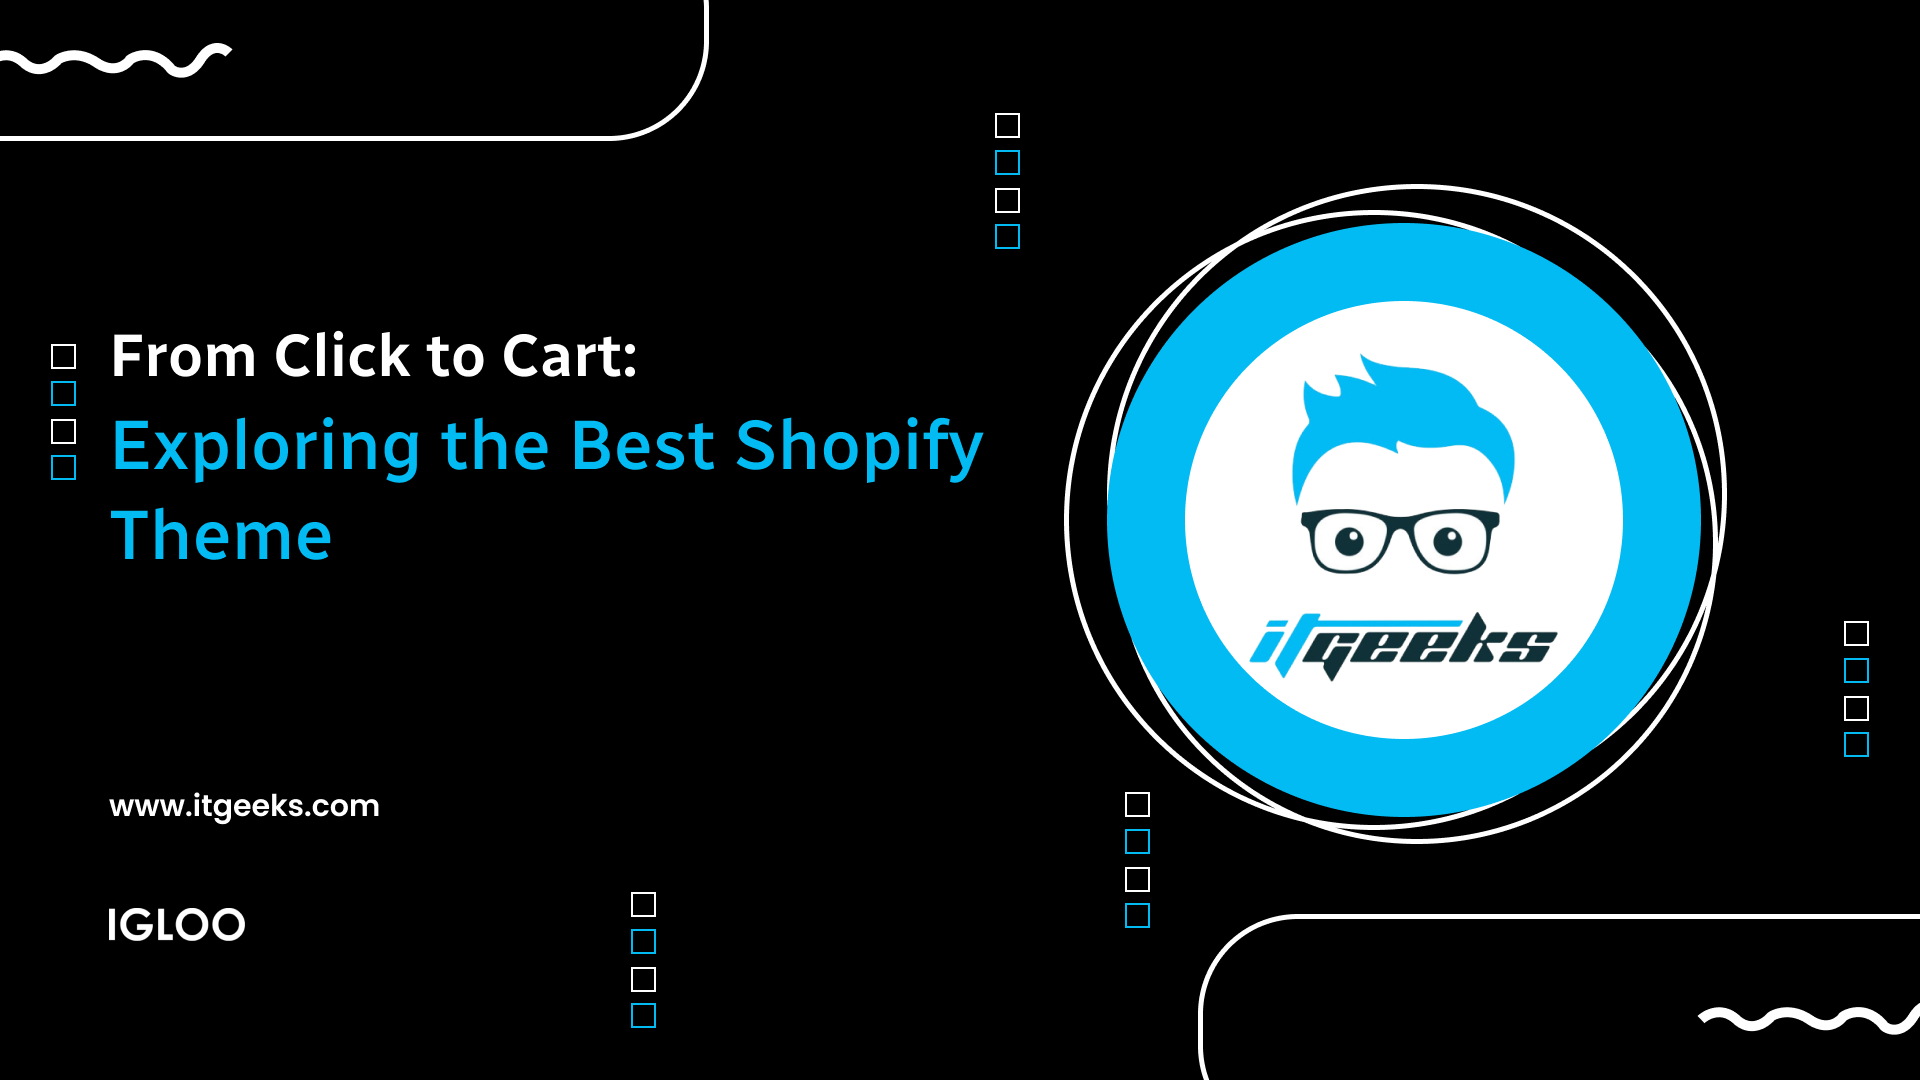 From Click to Cart: Exploring the Best Shopify Theme